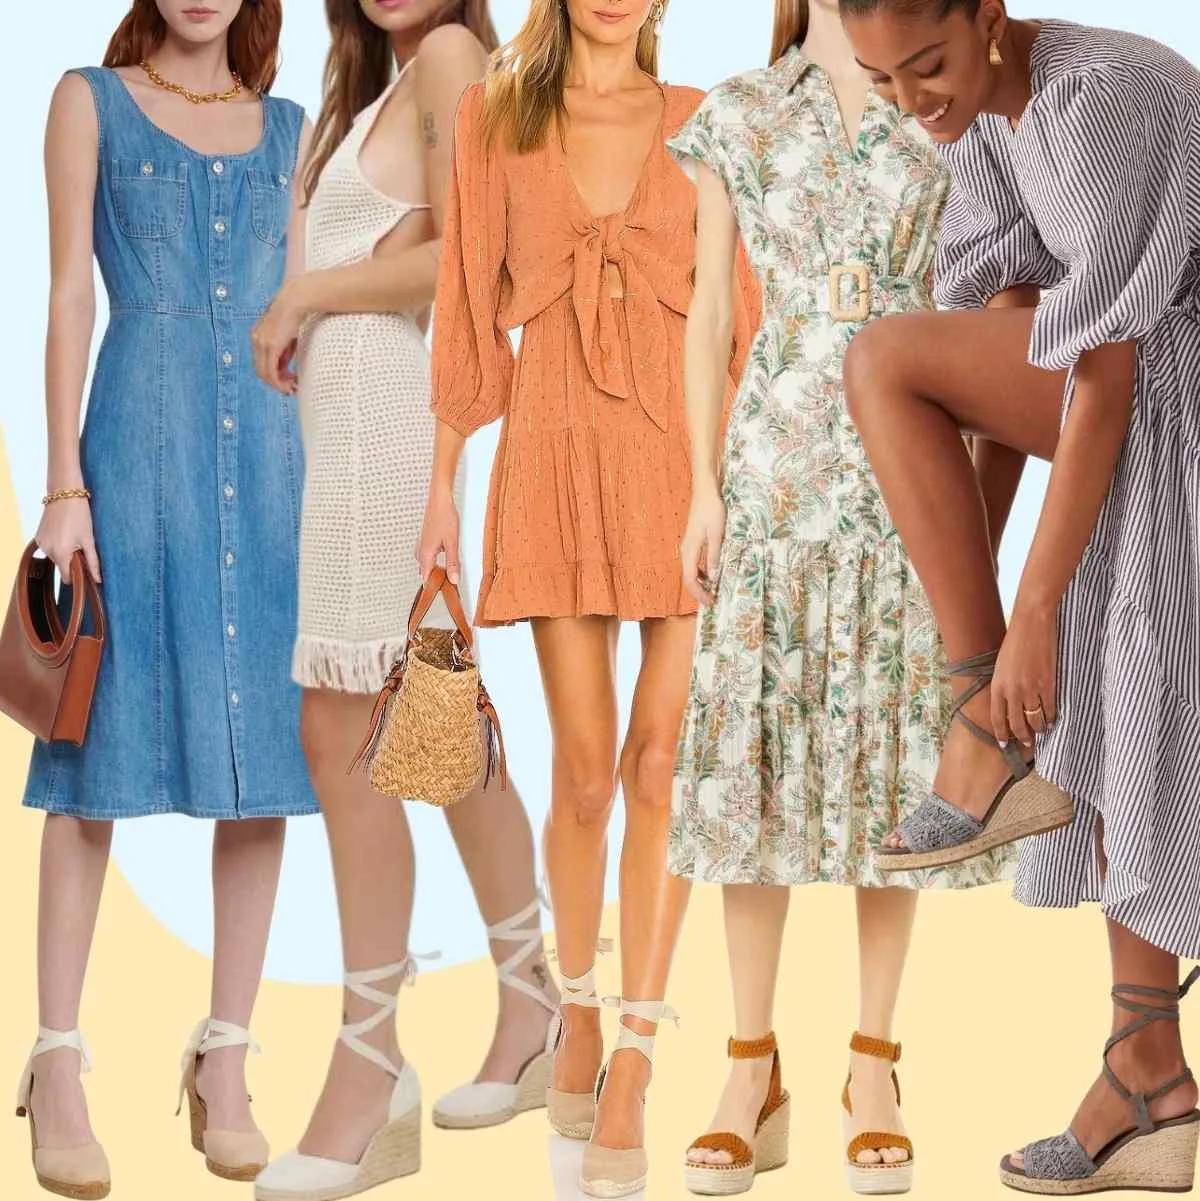 22 Fashionable Outfits With Espadrilles - Styleoholic